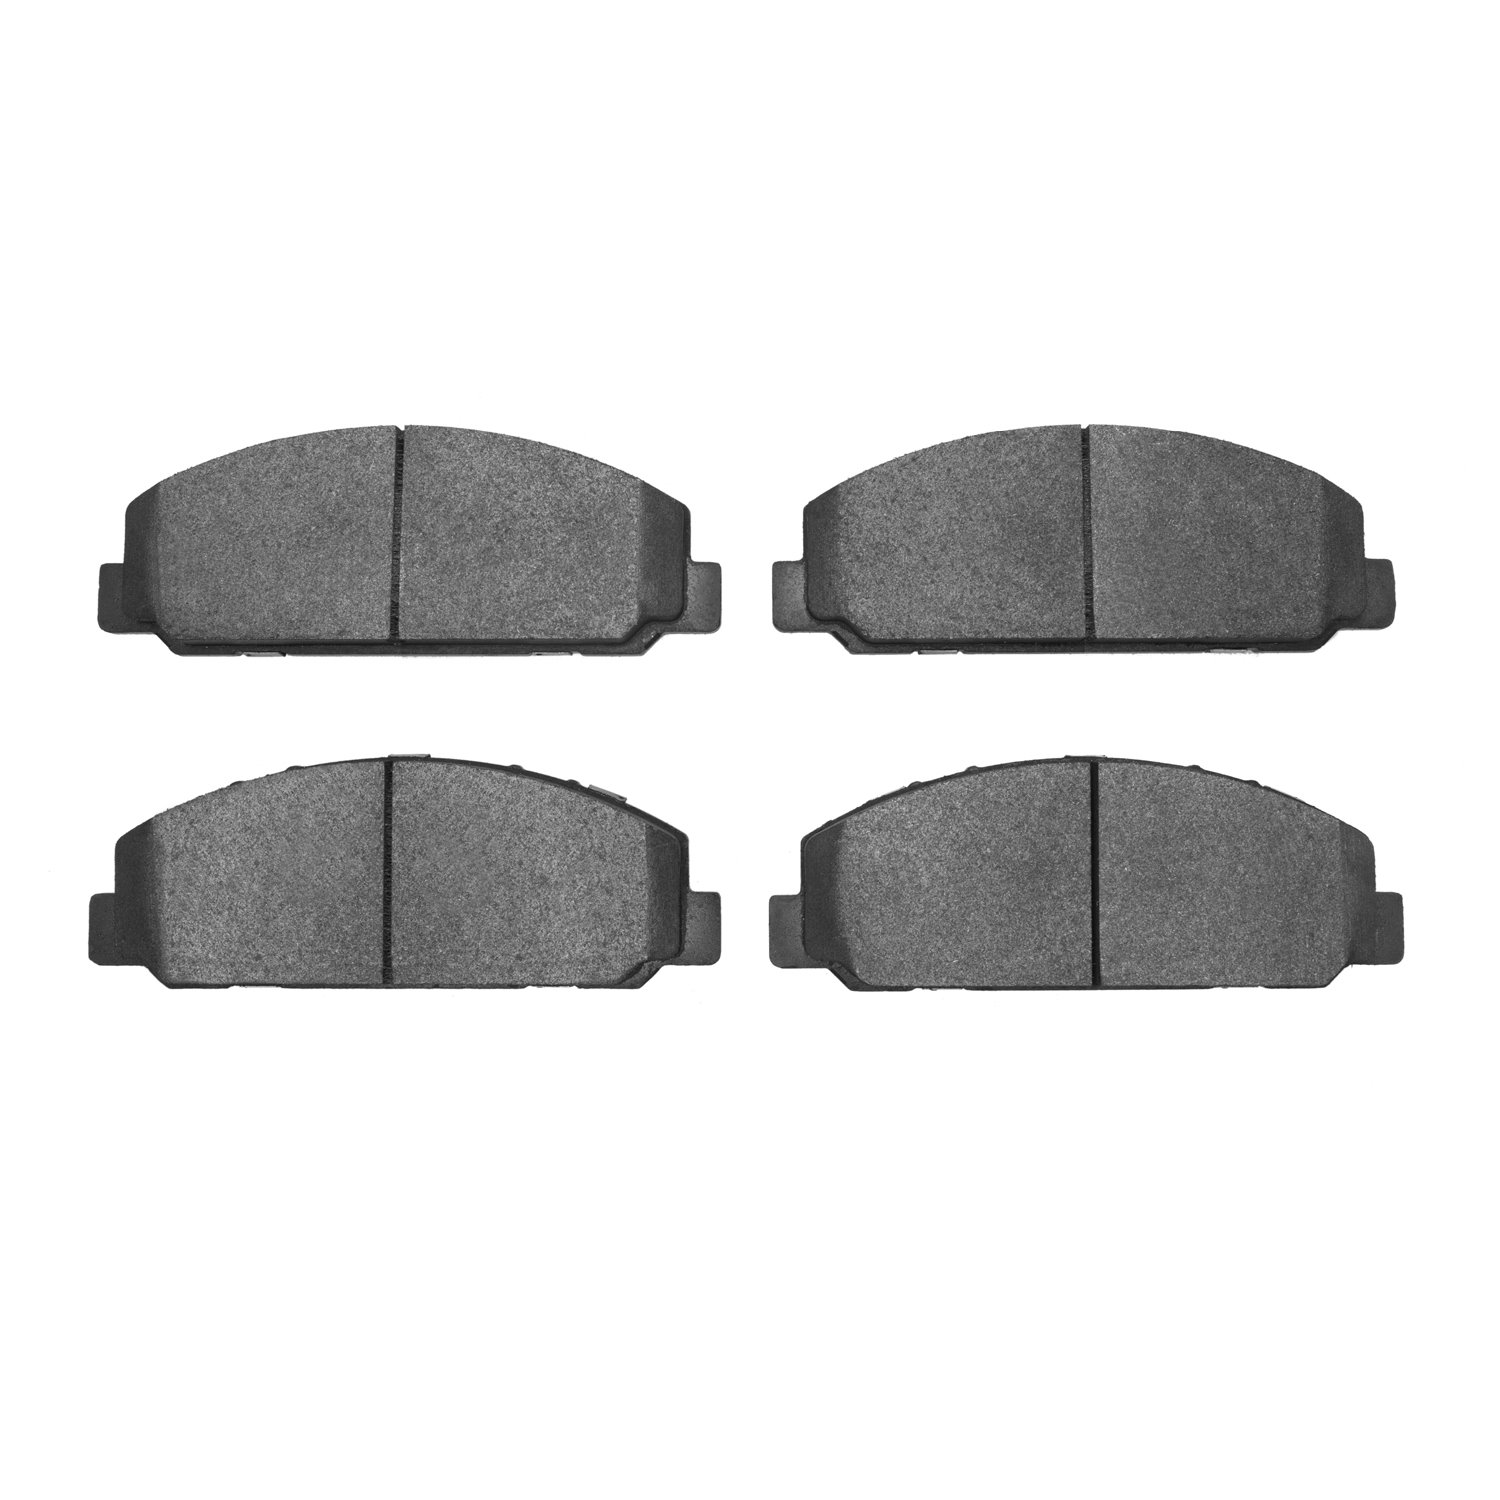 1311-0827-00 3000-Series Semi-Metallic Brake Pads, Fits Select GM, Position: Fr,Front,Rr